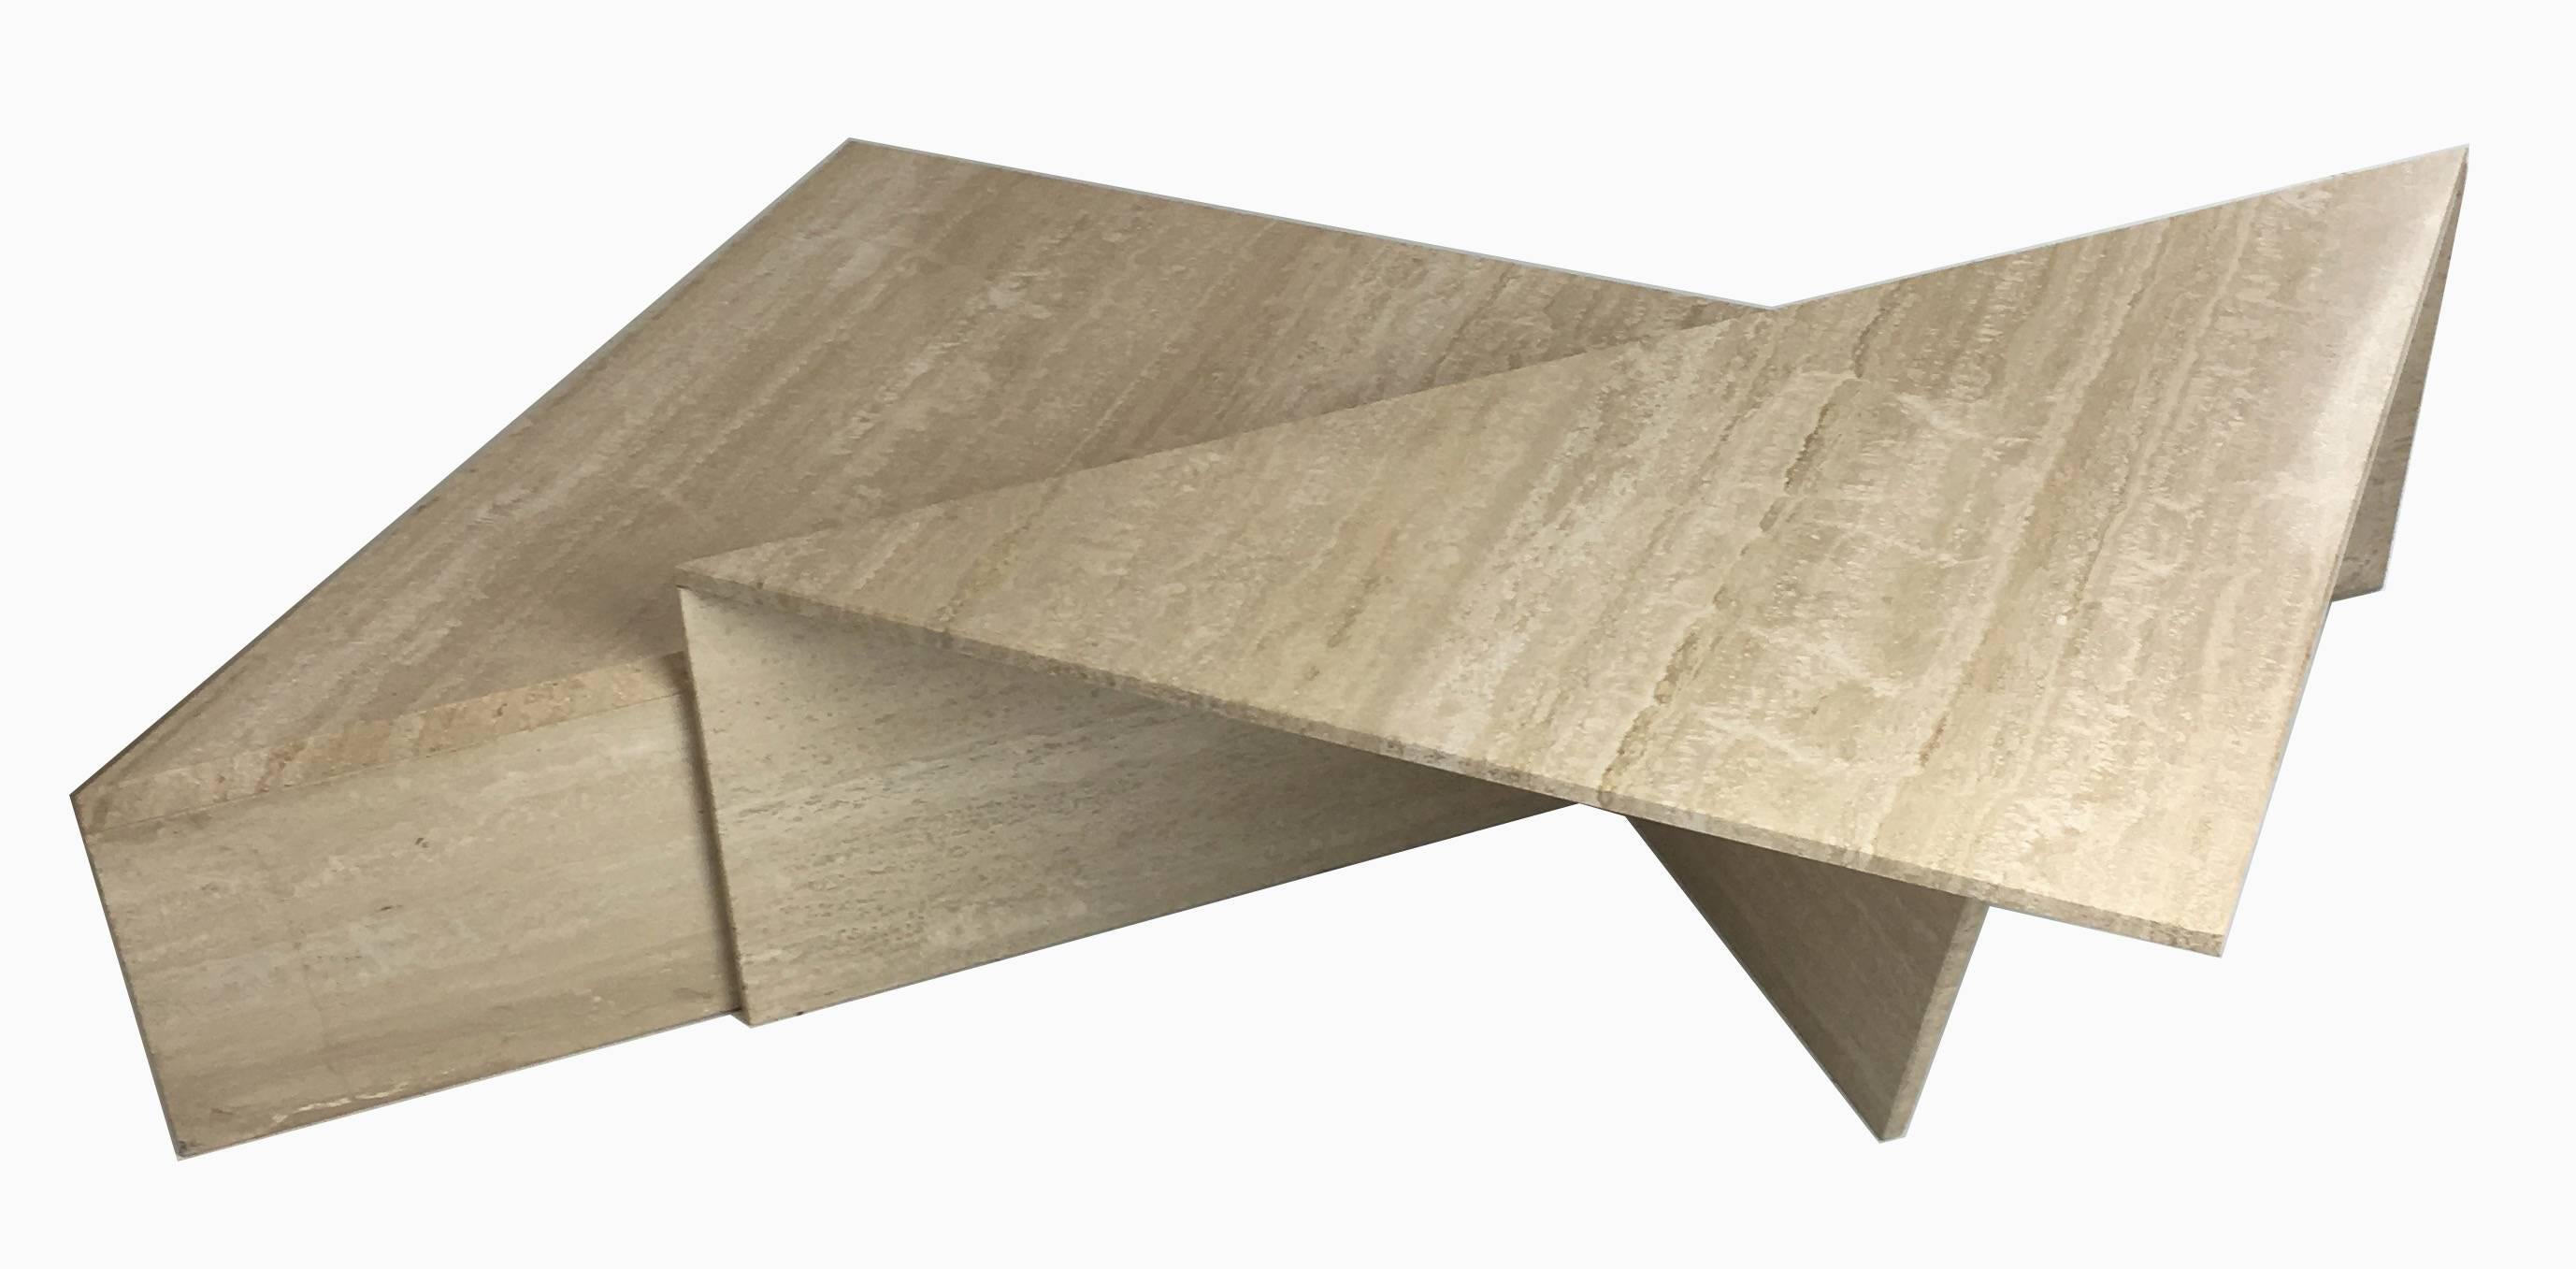 Fantastic Italian large-scale sculptural Travertine coffee table. The two-piece, bi-level cocktail table can be configured in a number of ways to compliment your seating with a super-chic 1970s vibe. All of the corners and joints are mitered and